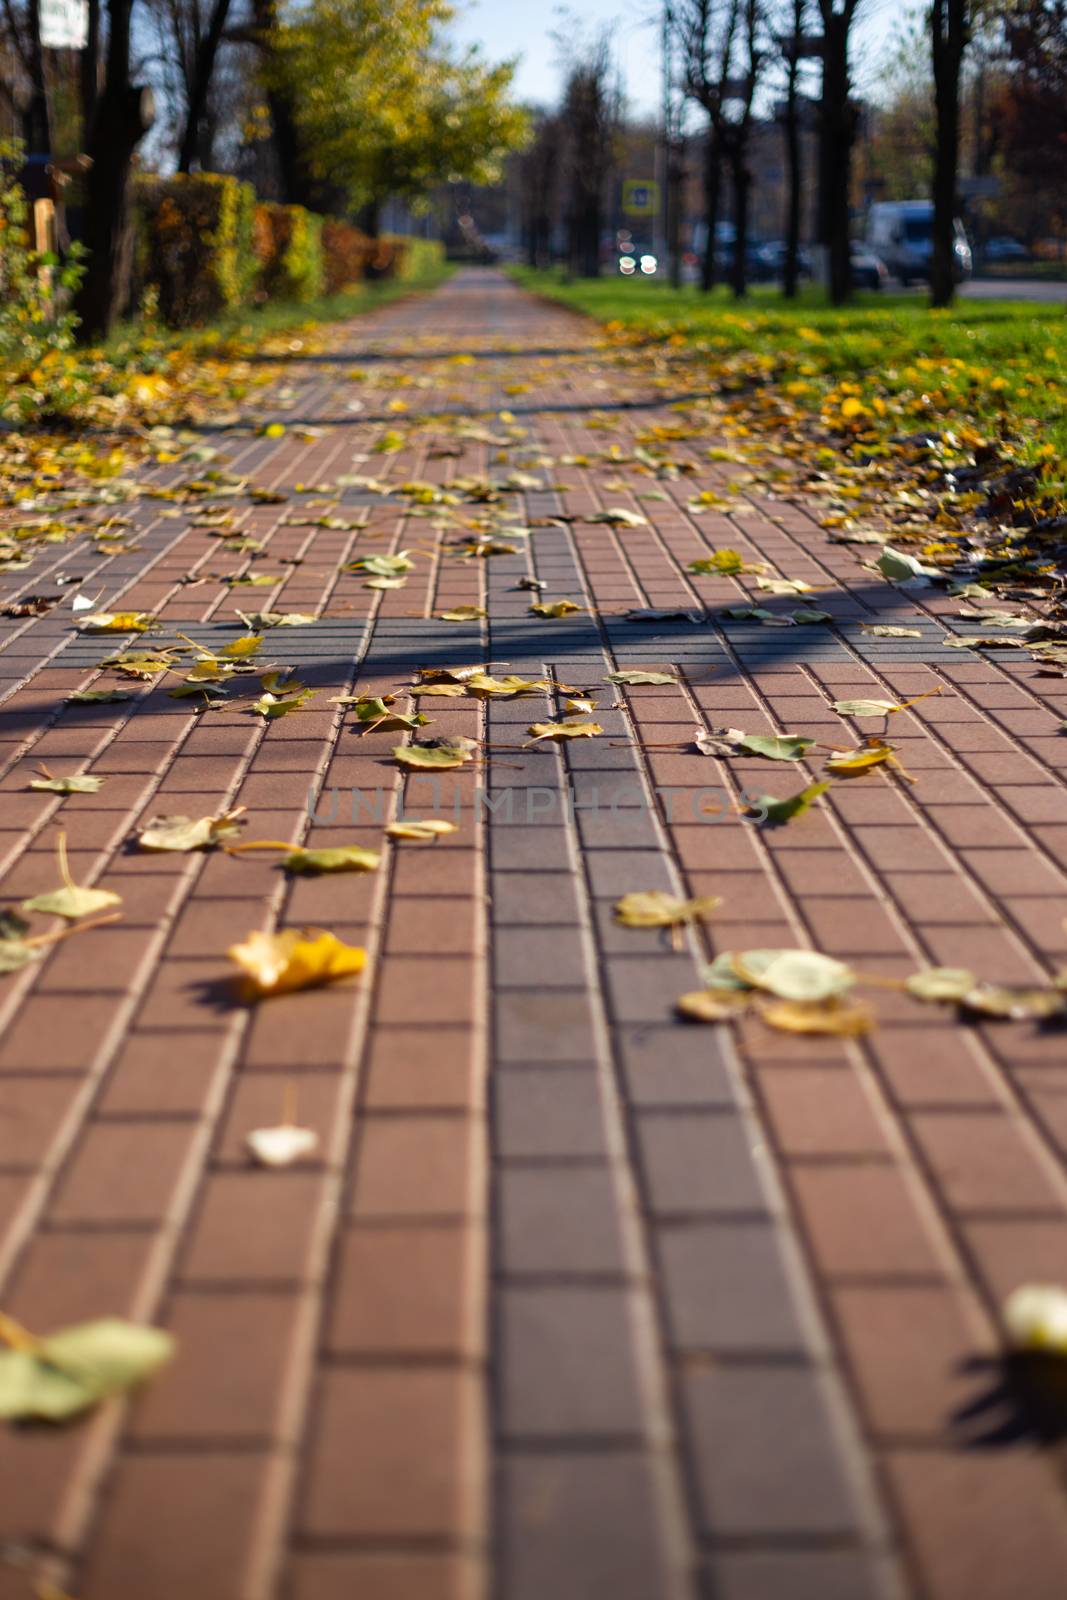 Autumn walking road with leaves at the curb. Green grass and orange leaves.